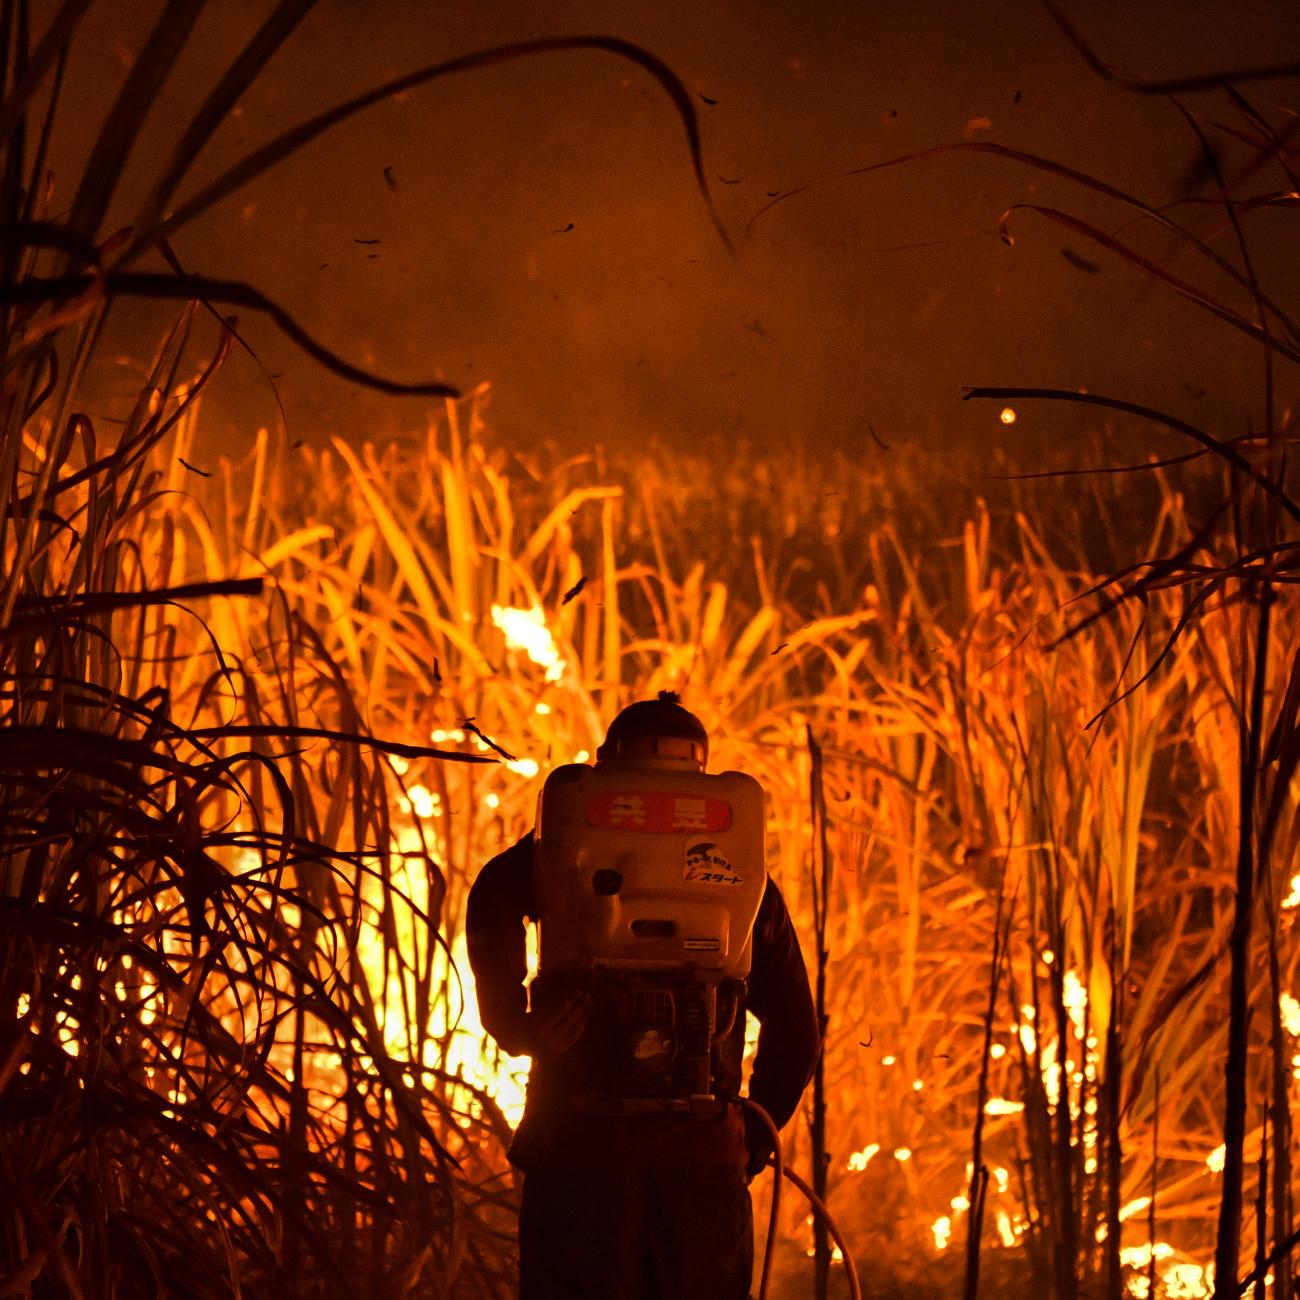 A farmer burns a sugar cane field at night as local growers try to avoid arrest by authorities who banned on the practice to curb smog in Suphan Buri province, Thailand, on January 20, 2020.